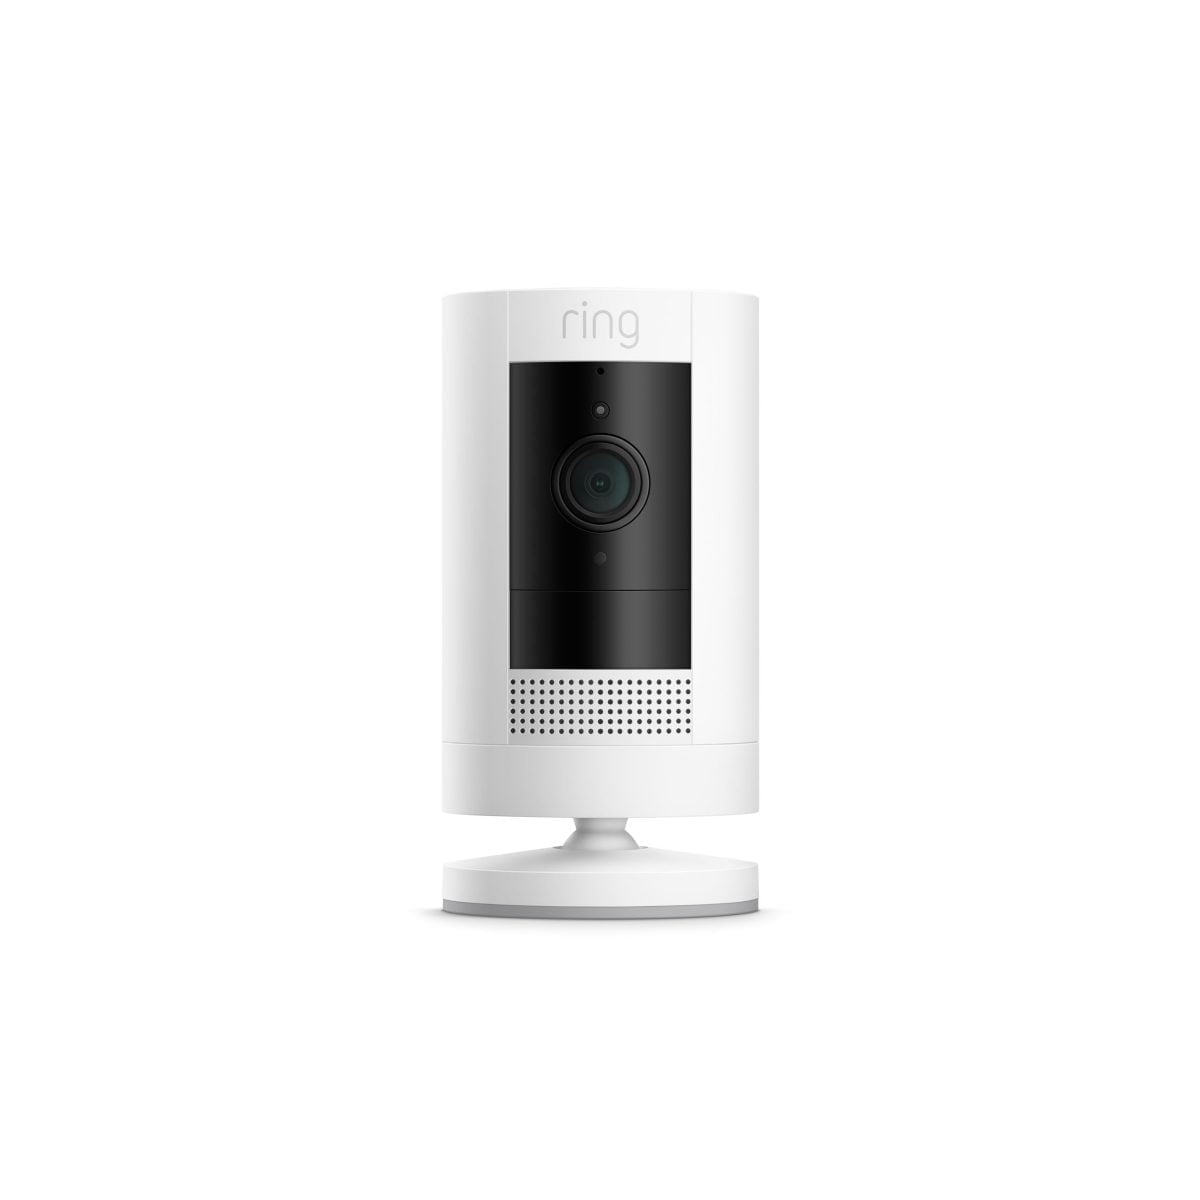 2019 Device Suc Batt White Scaled Ring Https://Youtu.be/Sdouokk6Eyk Add Security Inside Or Out With A Versatile Camera That Goes Almost Anywhere. Ring Stick Up Cam Battery Is An Indoor/Outdoor Camera That Sends Notifications To Your Phone And Tablet Whenever Motion Is Detected. Answer The Notification, And You Can See, Hear, And Speak To People On Camera From Anywhere. Place It On A Flat Surface So You Can Move It When You Need To. Or Mount It To A Wall For More Permanent Placement. With Ring Stick Up Cam Battery, You’ll Always Be Connected To Home So You Can See What’s Happening At Any Time. One Year Manufacturer Warranty Ring Ring Indoor/Outdoor 1080Hd Security Battery Cam With Two Way Talk